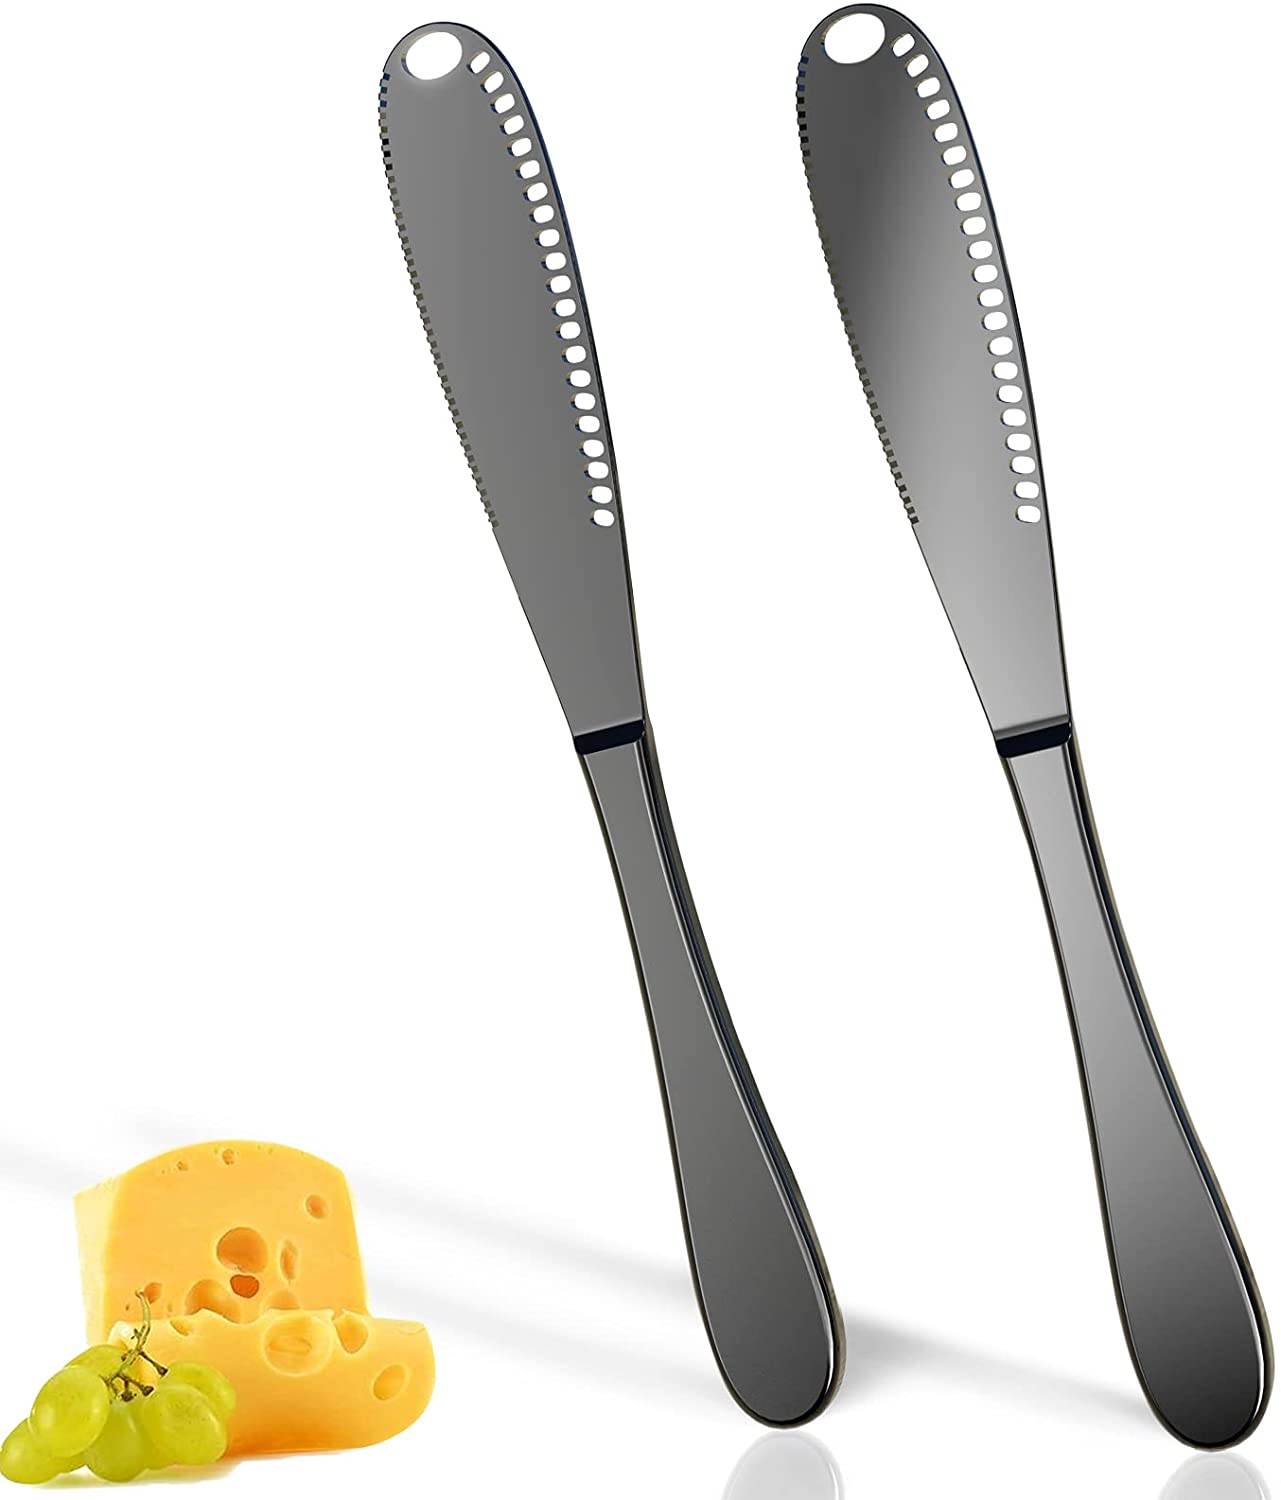 2PCS Butter Knife, A Serrated Edge, Cut Vegetables Or Fruits